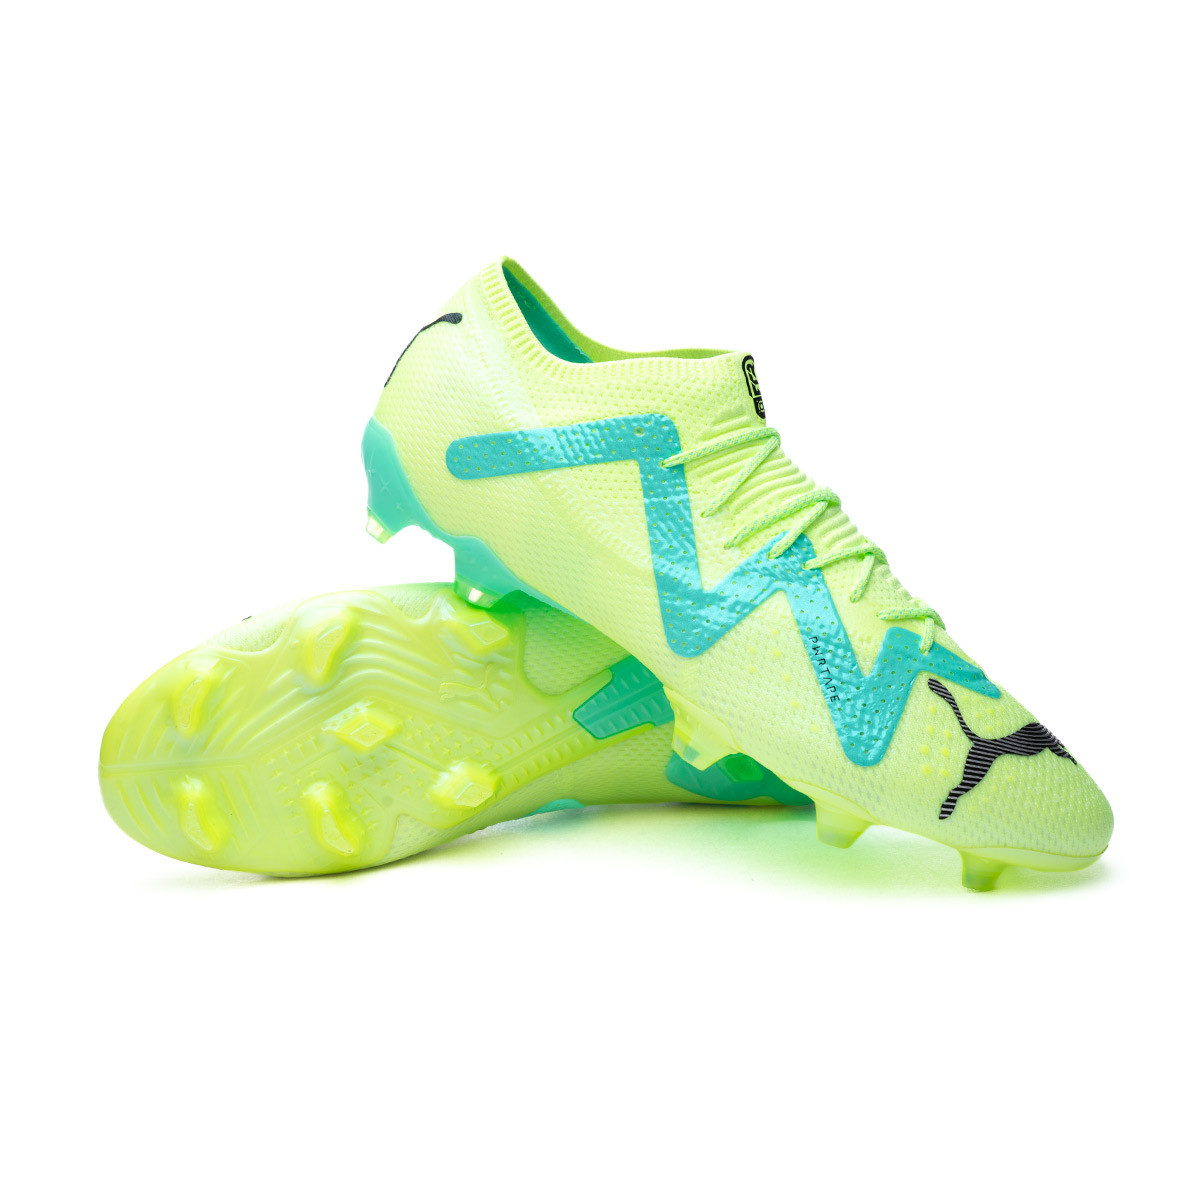 Boots Puma Future Ultimate Low FG/AG Yellow-Black-Electric Peppermint - Fútbol Emotion